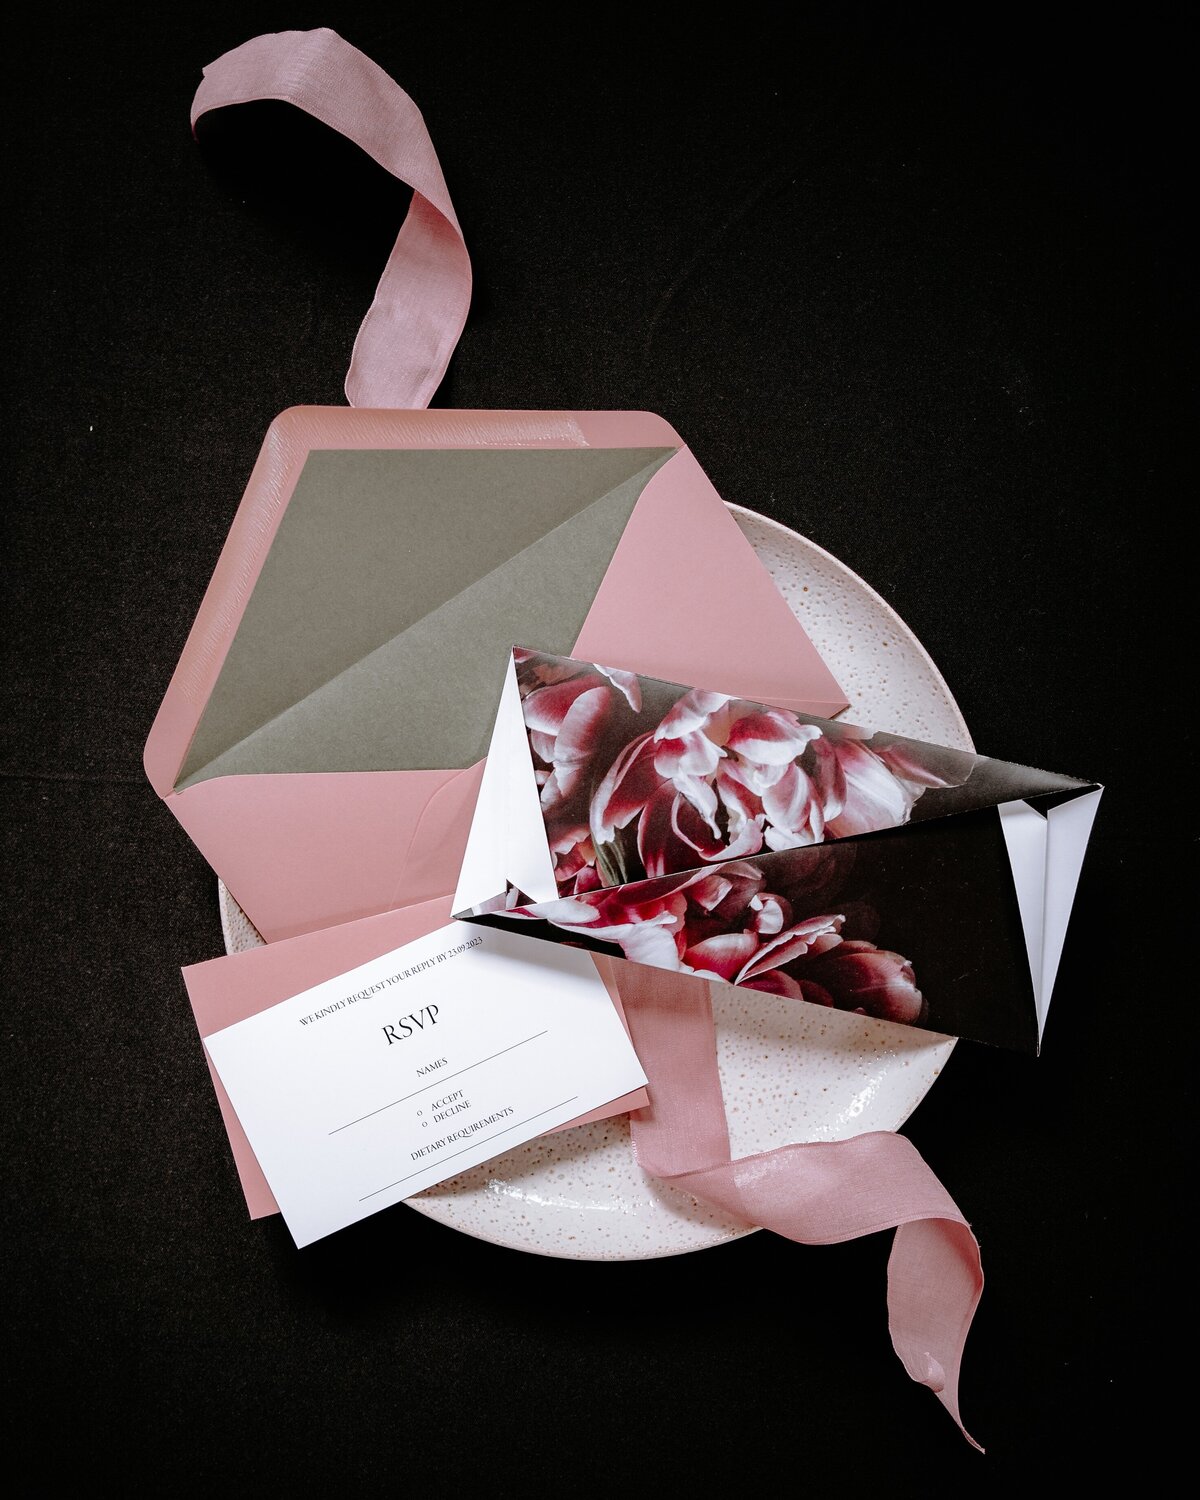 Folded origami wedding invitation with pink and moody floral graphic and pink envelope